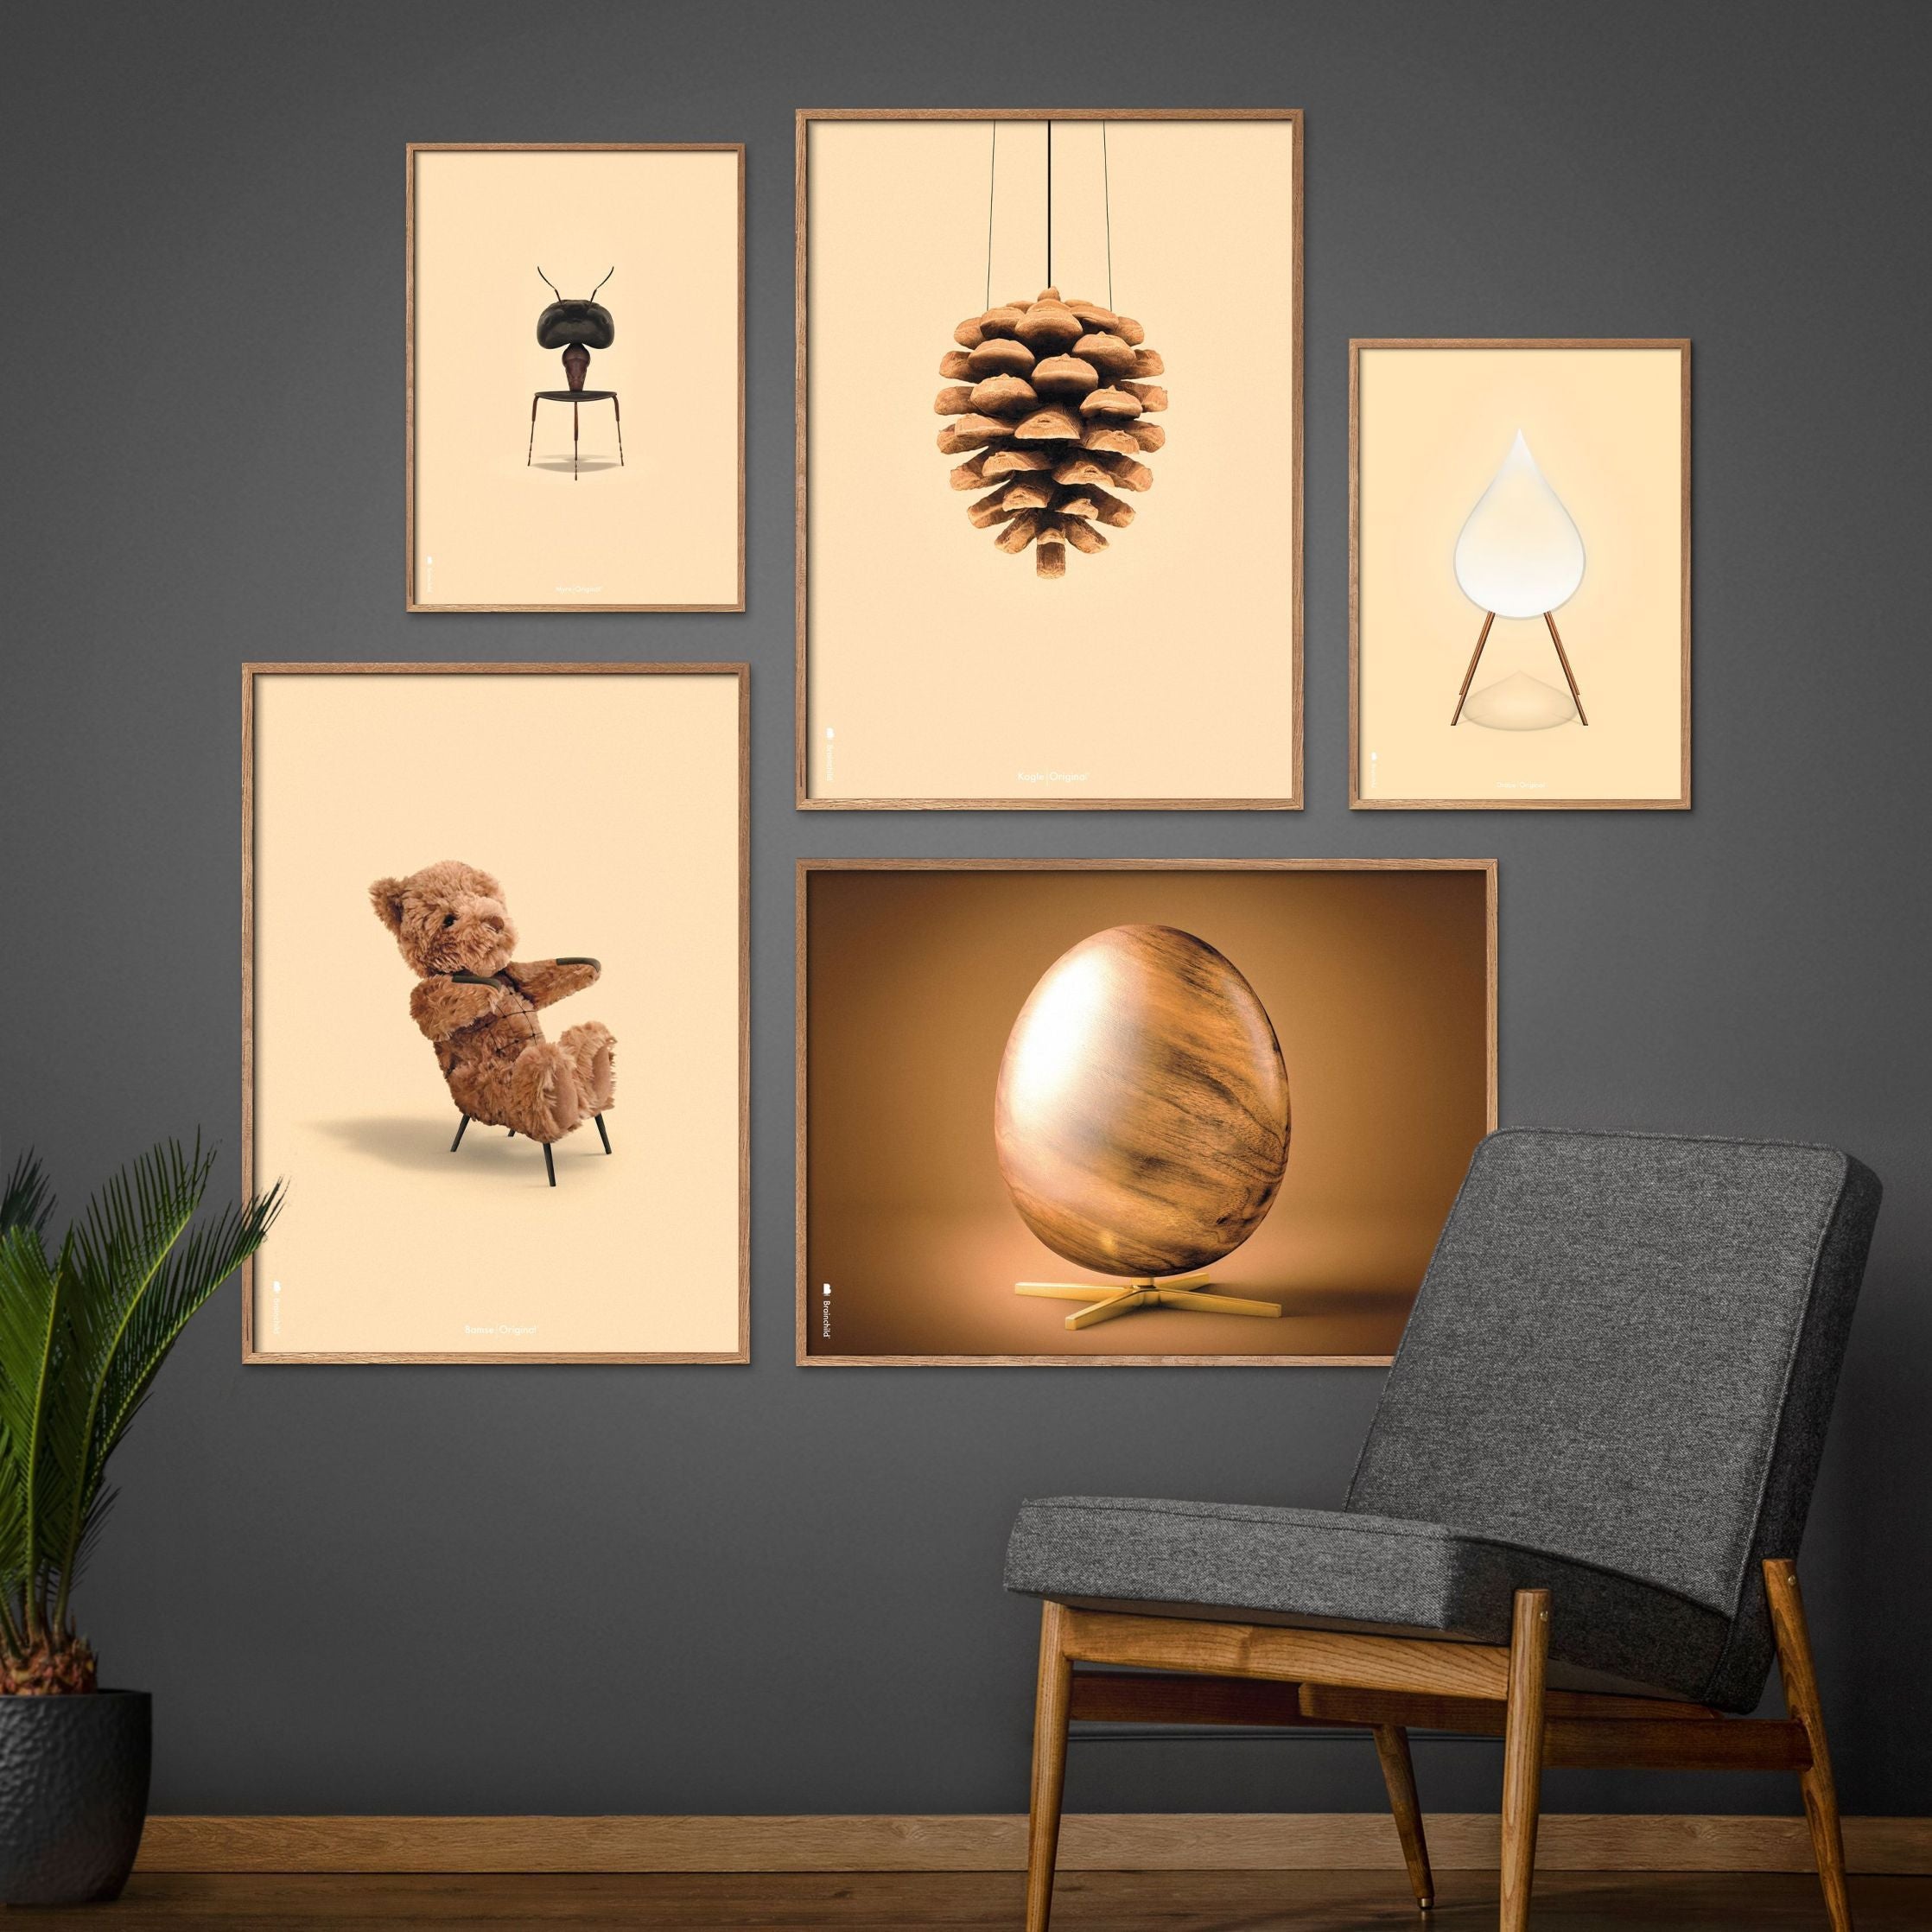 Brainchild Pine Cone Classic Poster Without Frame 30x40 Cm, Sand Colored Background